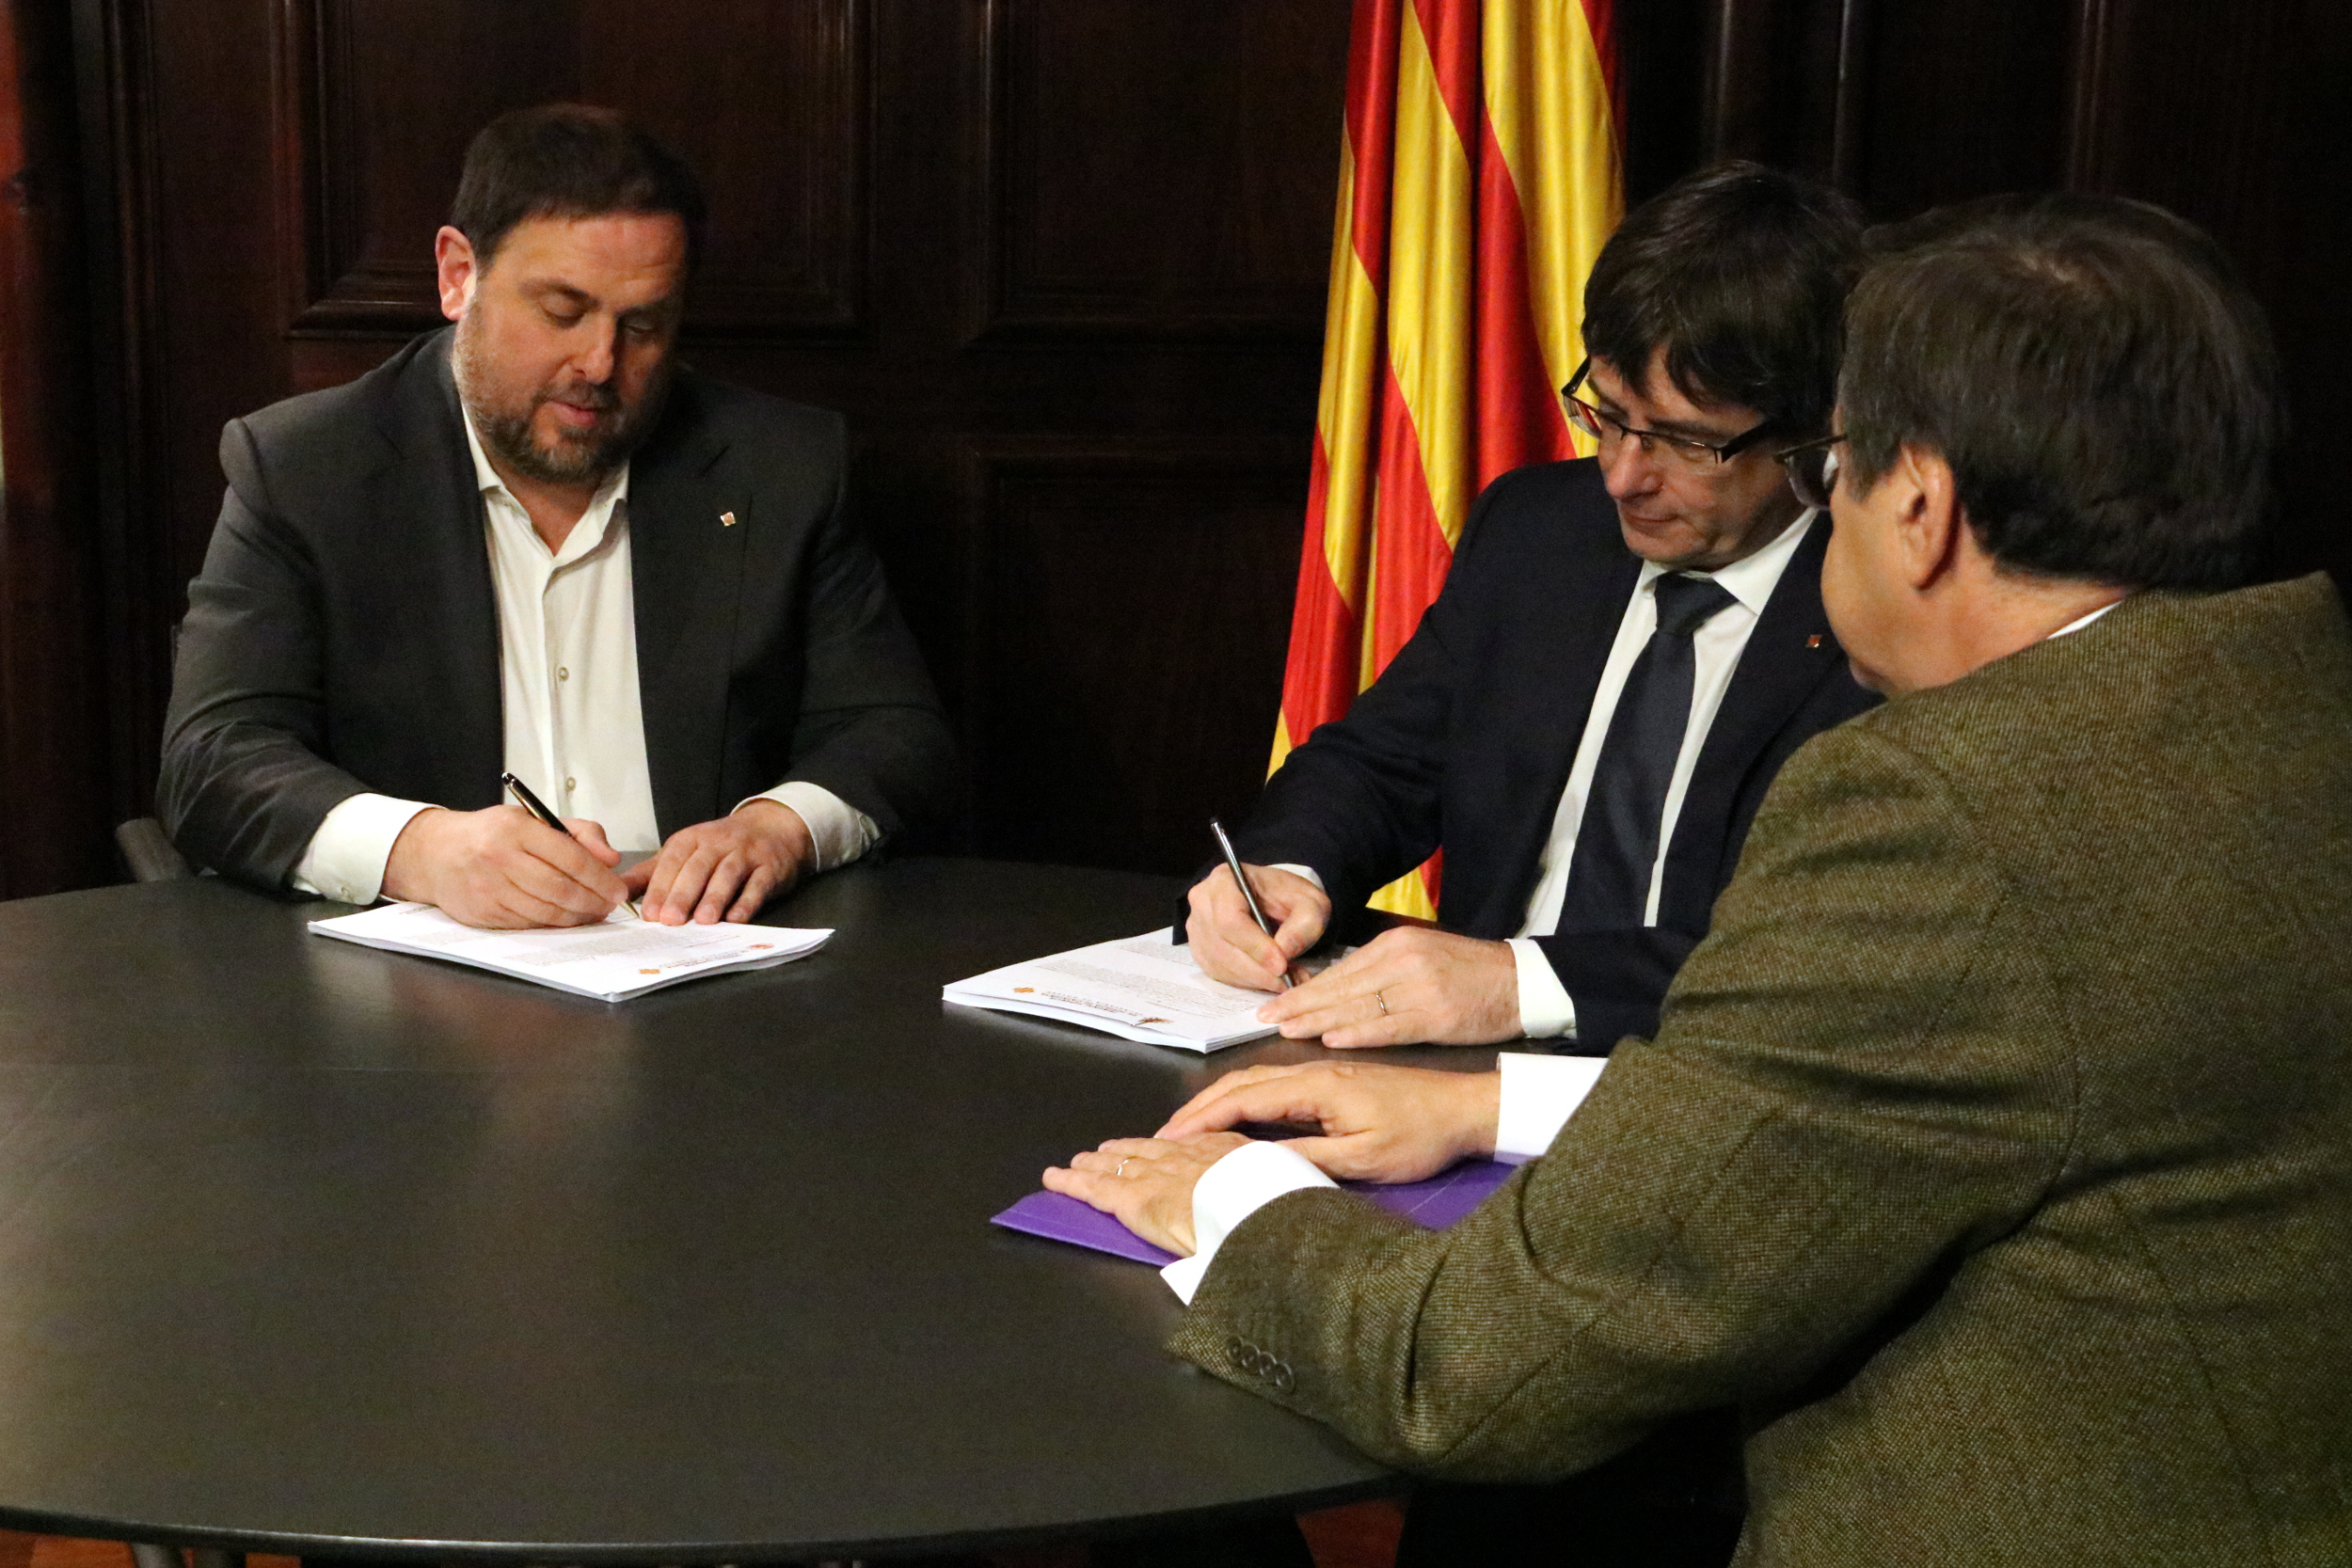 Catalan President, Carles Puigdemont and Catalan Vice President, Oriol Junqueras, signing the TC's notice which suspends the Government's plan to call a referendum in September 2017 (by ACN)